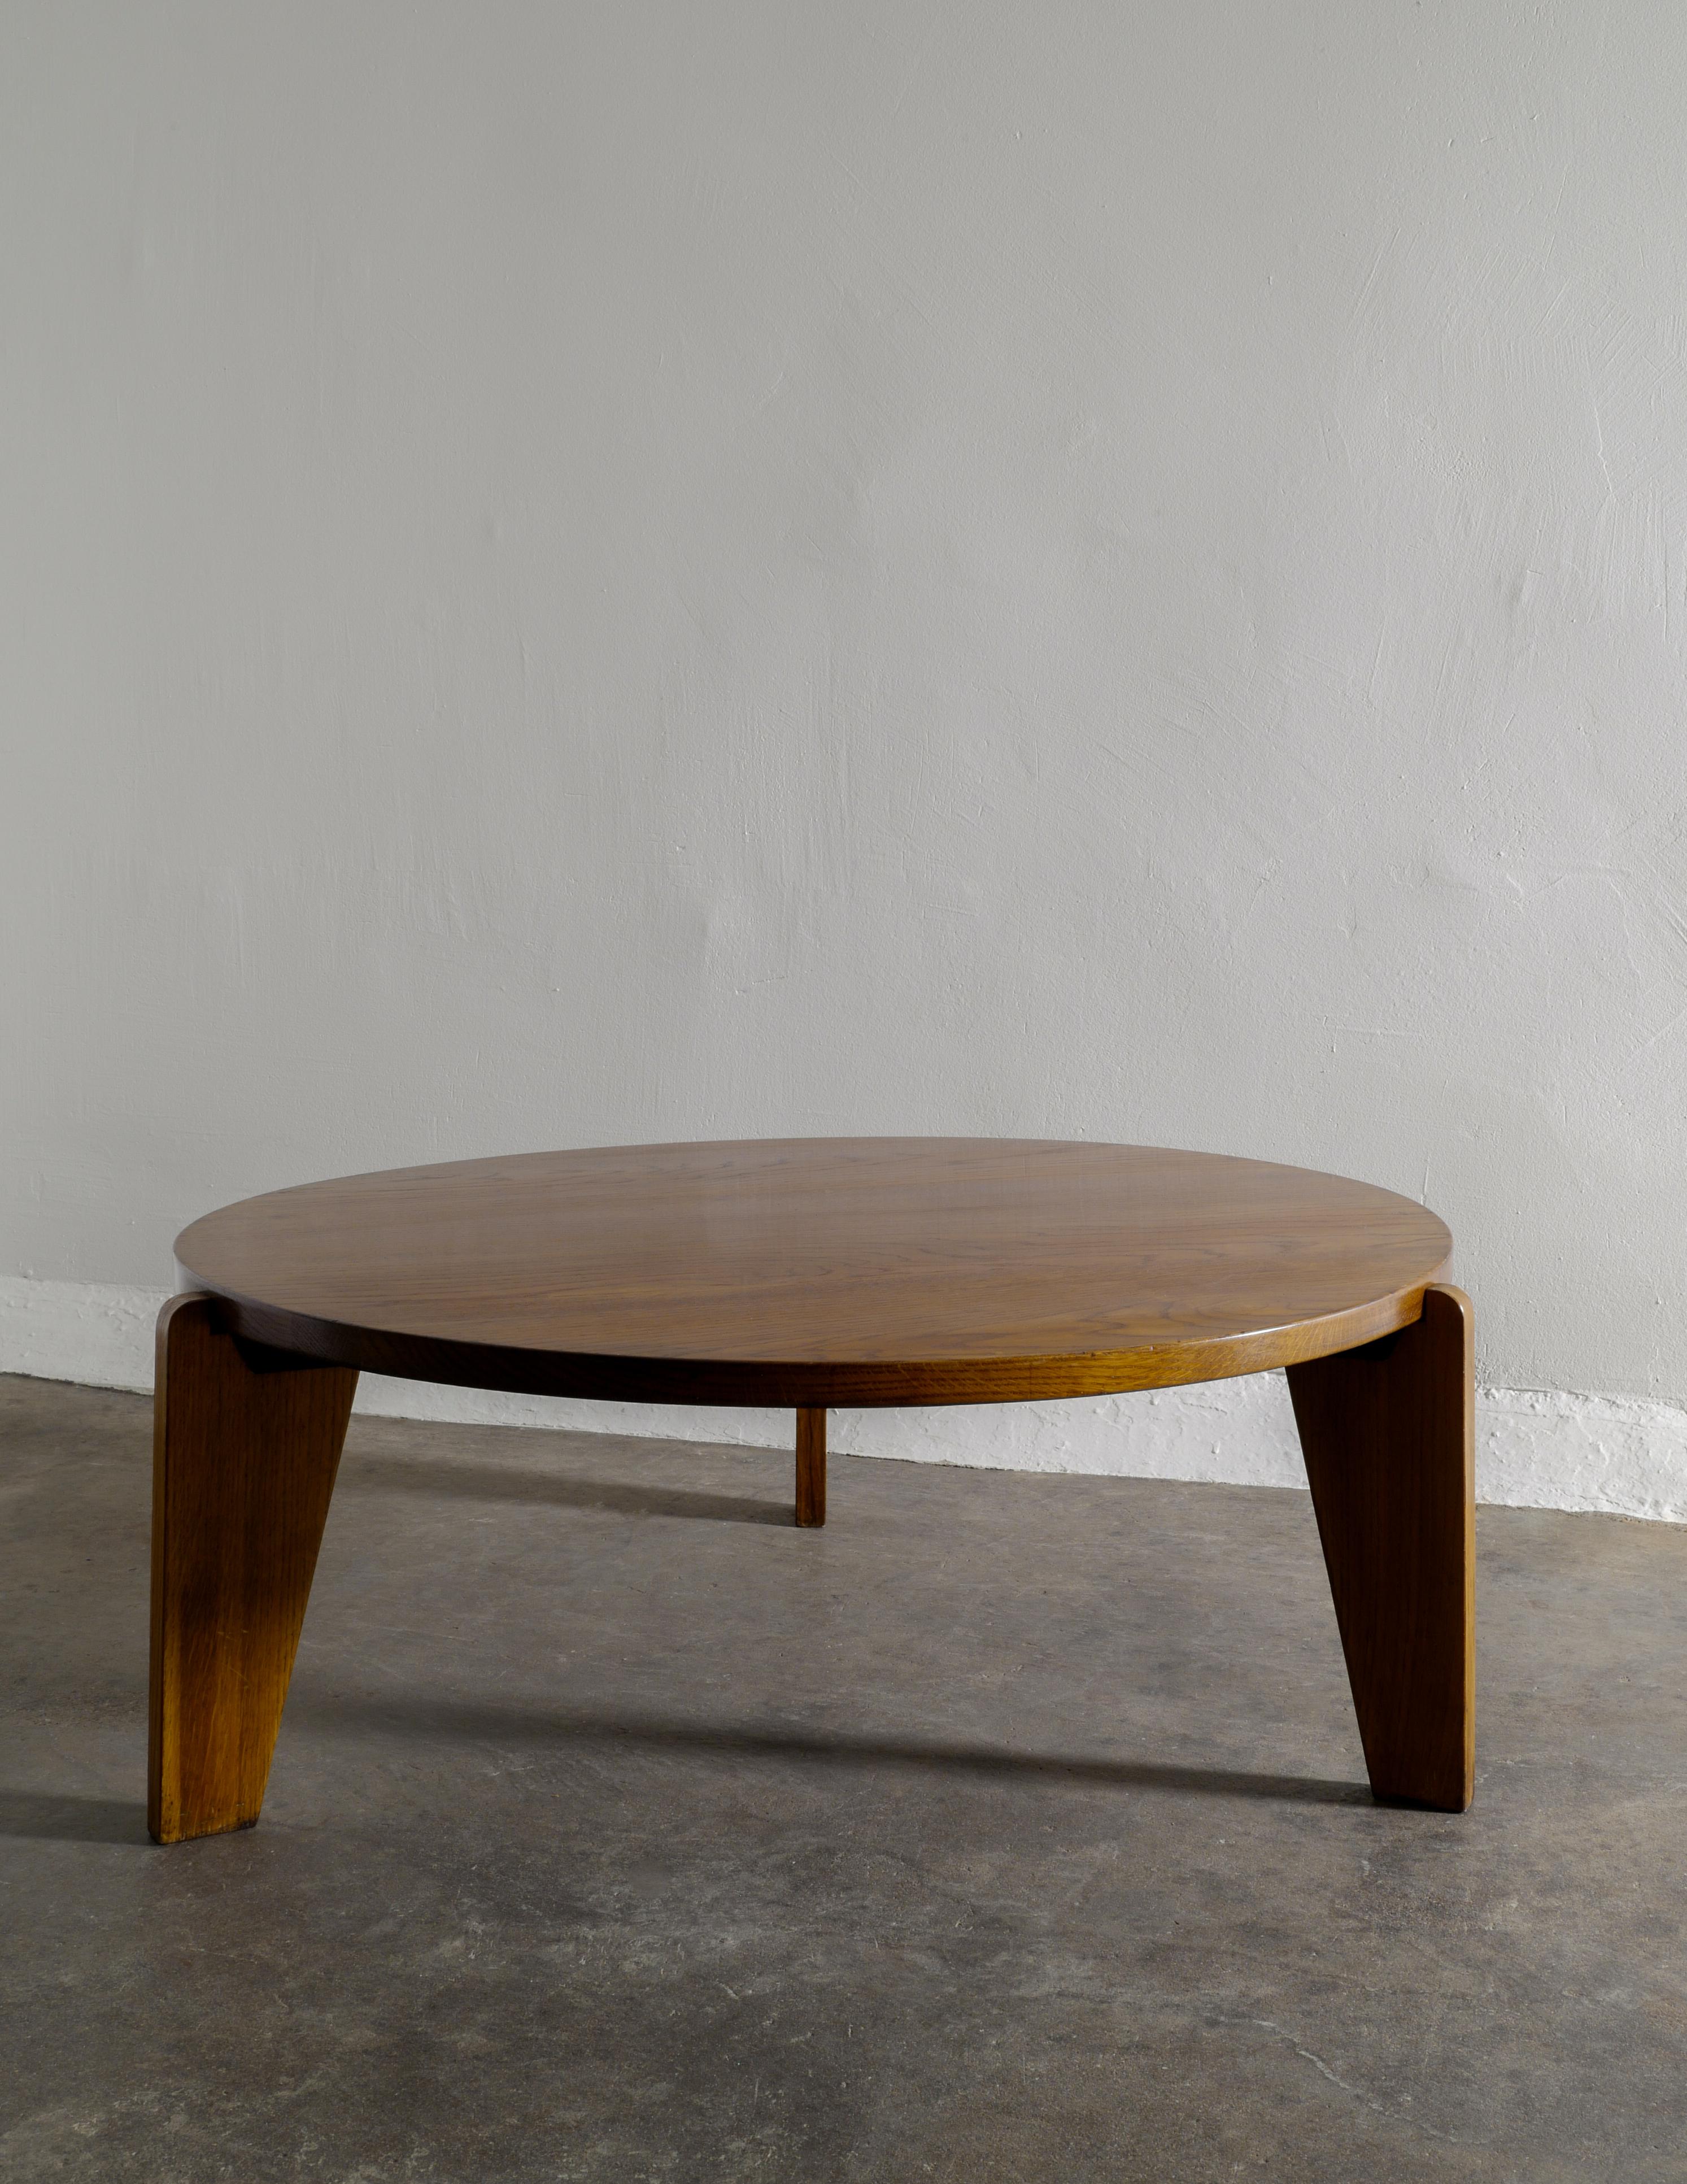 Coffee Table in style of Jean Prouvé 